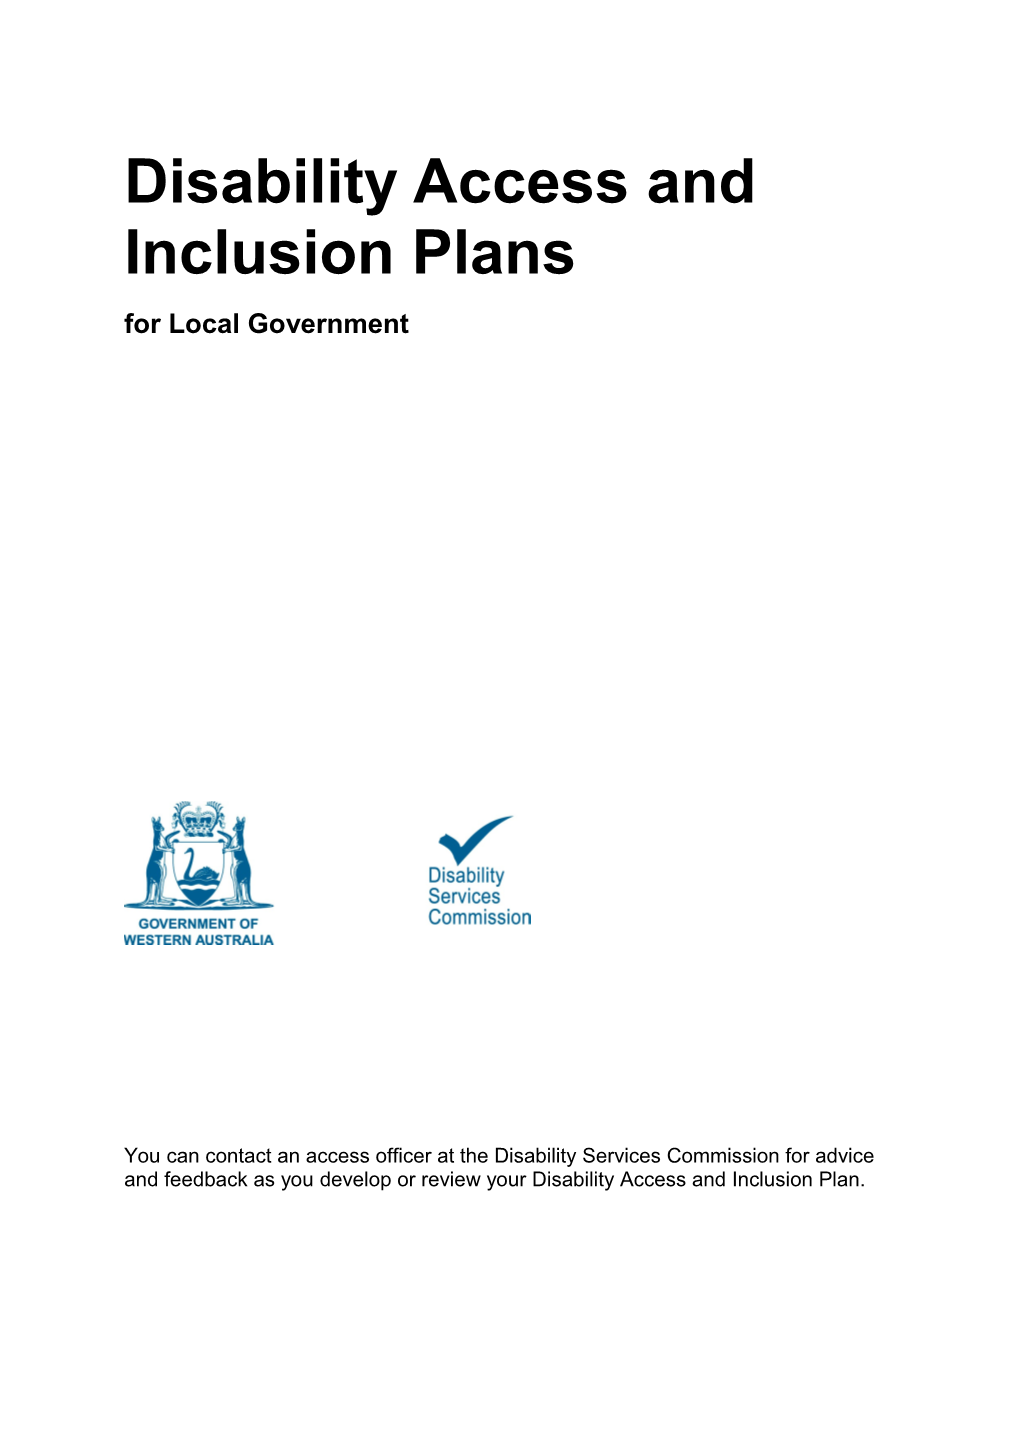 Disability Access and Inclusion Plans